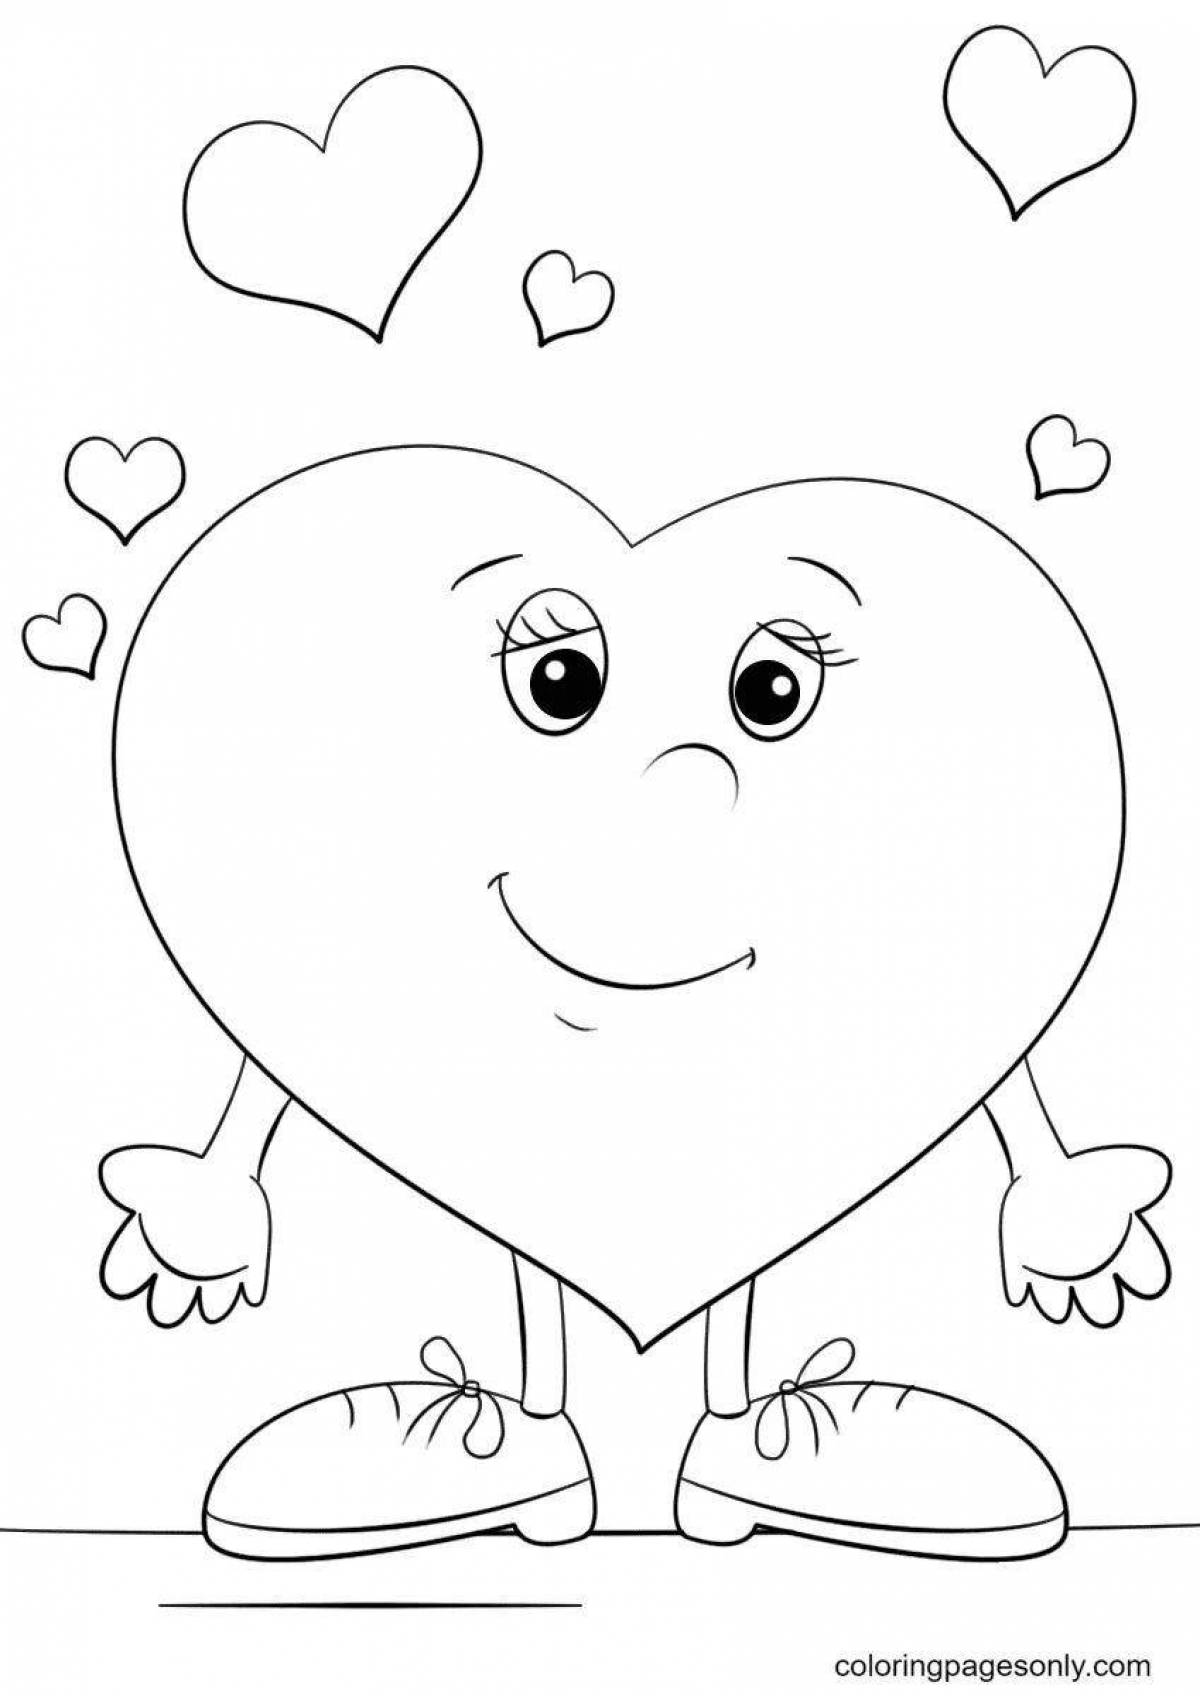 Adorable heart coloring book for kids